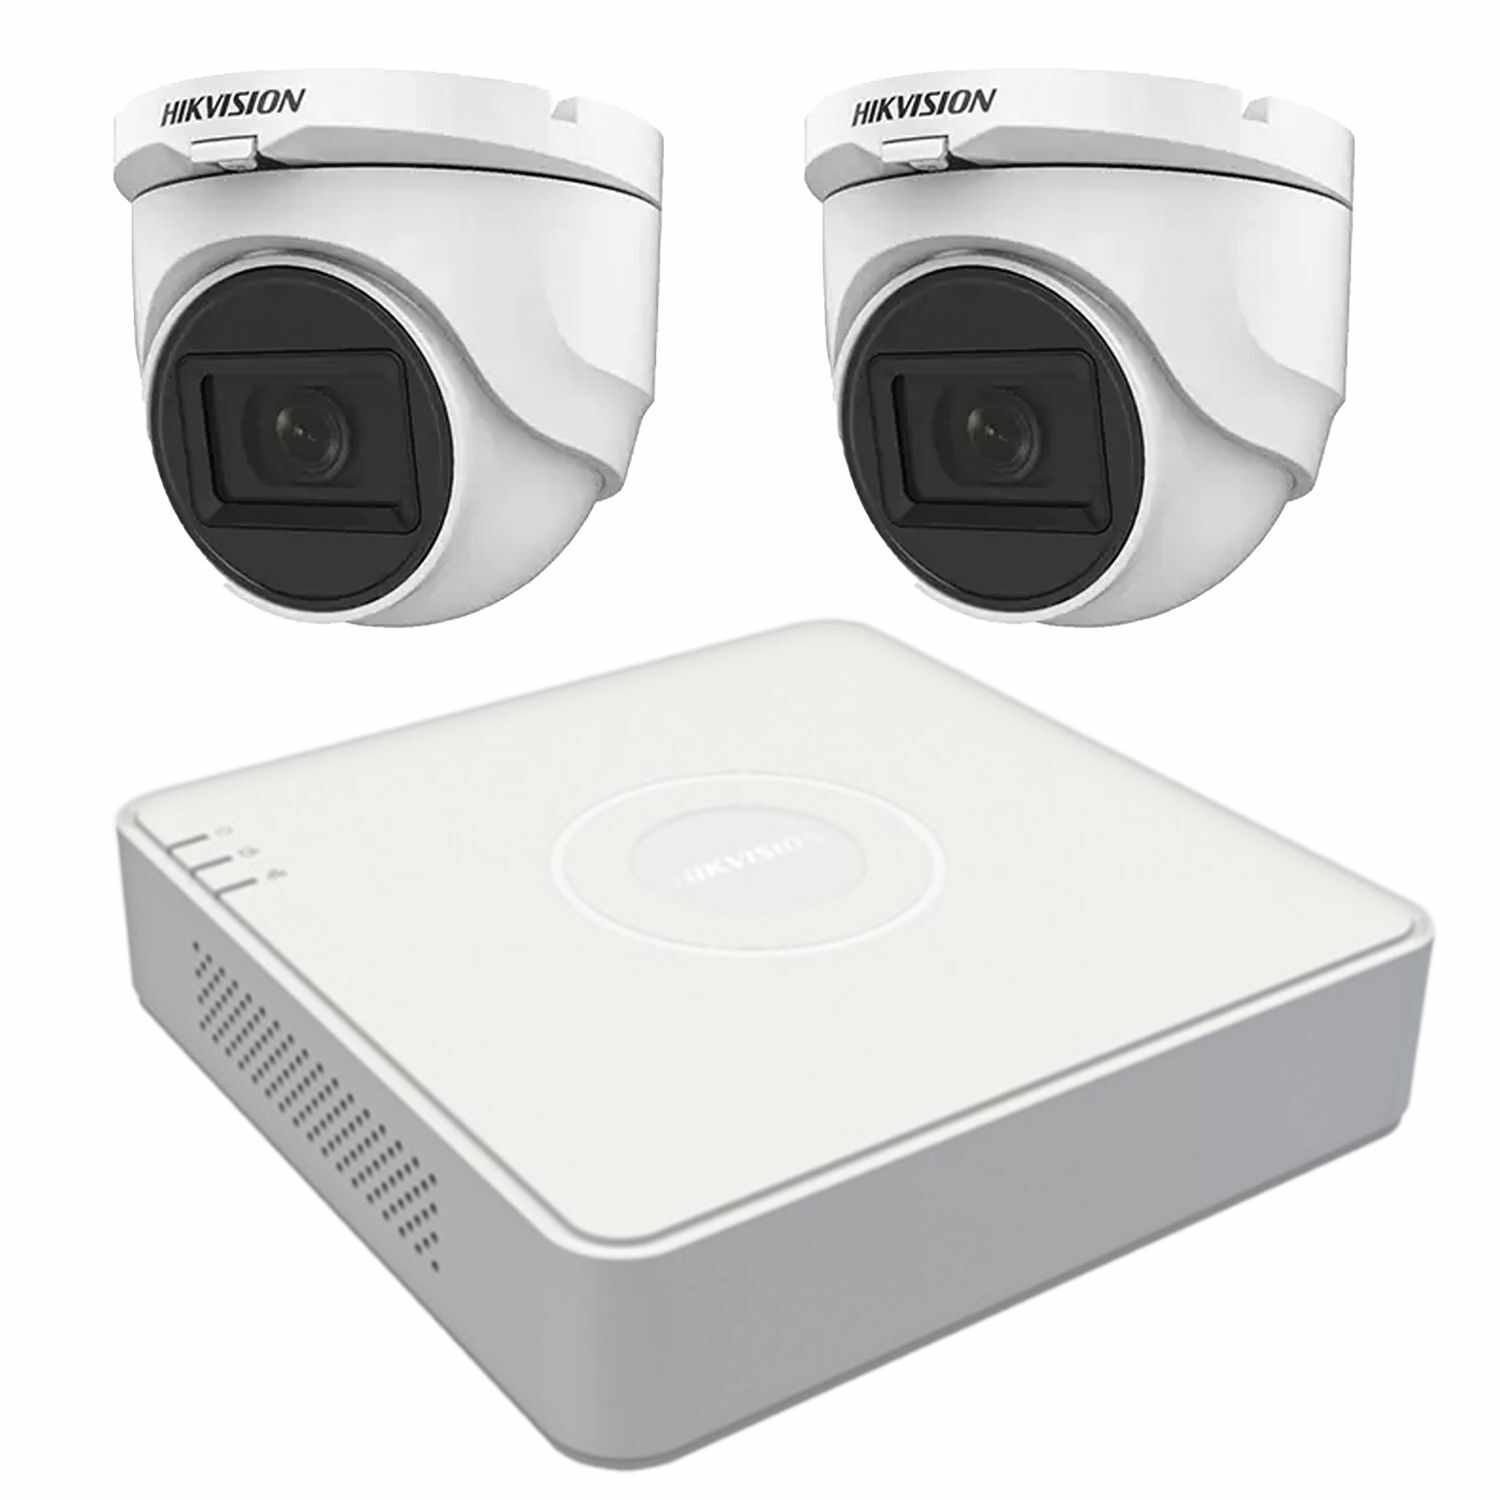 Sistem supraveghere Hikvision interior 2 camere 2MP, 2.8mm, IR 30m, 4 in 1, DVR 4 canale TurboHD